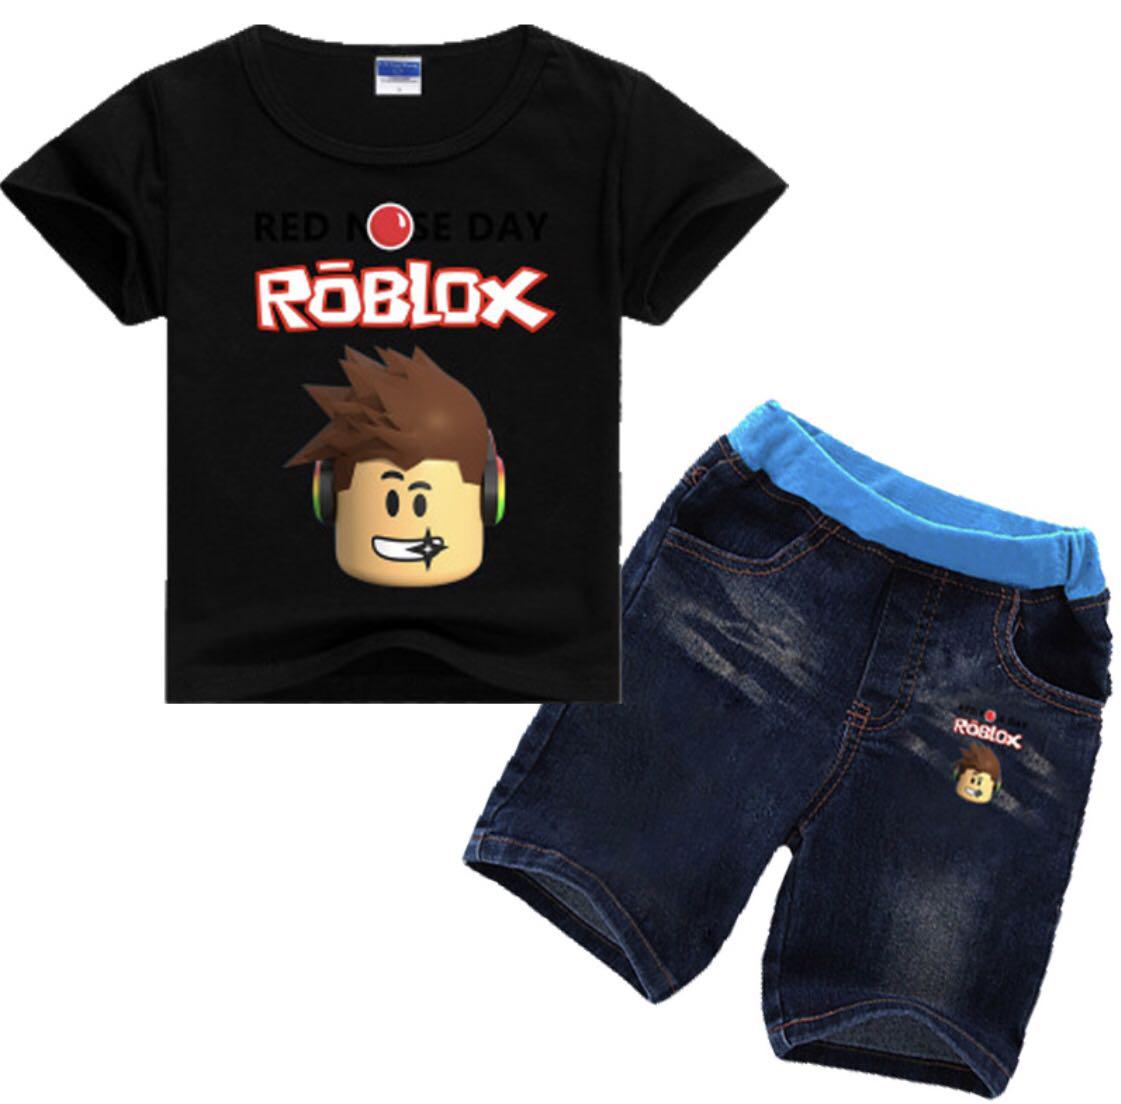 Bn Roblox Shirt Pants Set Size 135 140 Babies Kids Boys Apparel 4 To 7 Years On Carousell - free shirt pants purchaser roblox